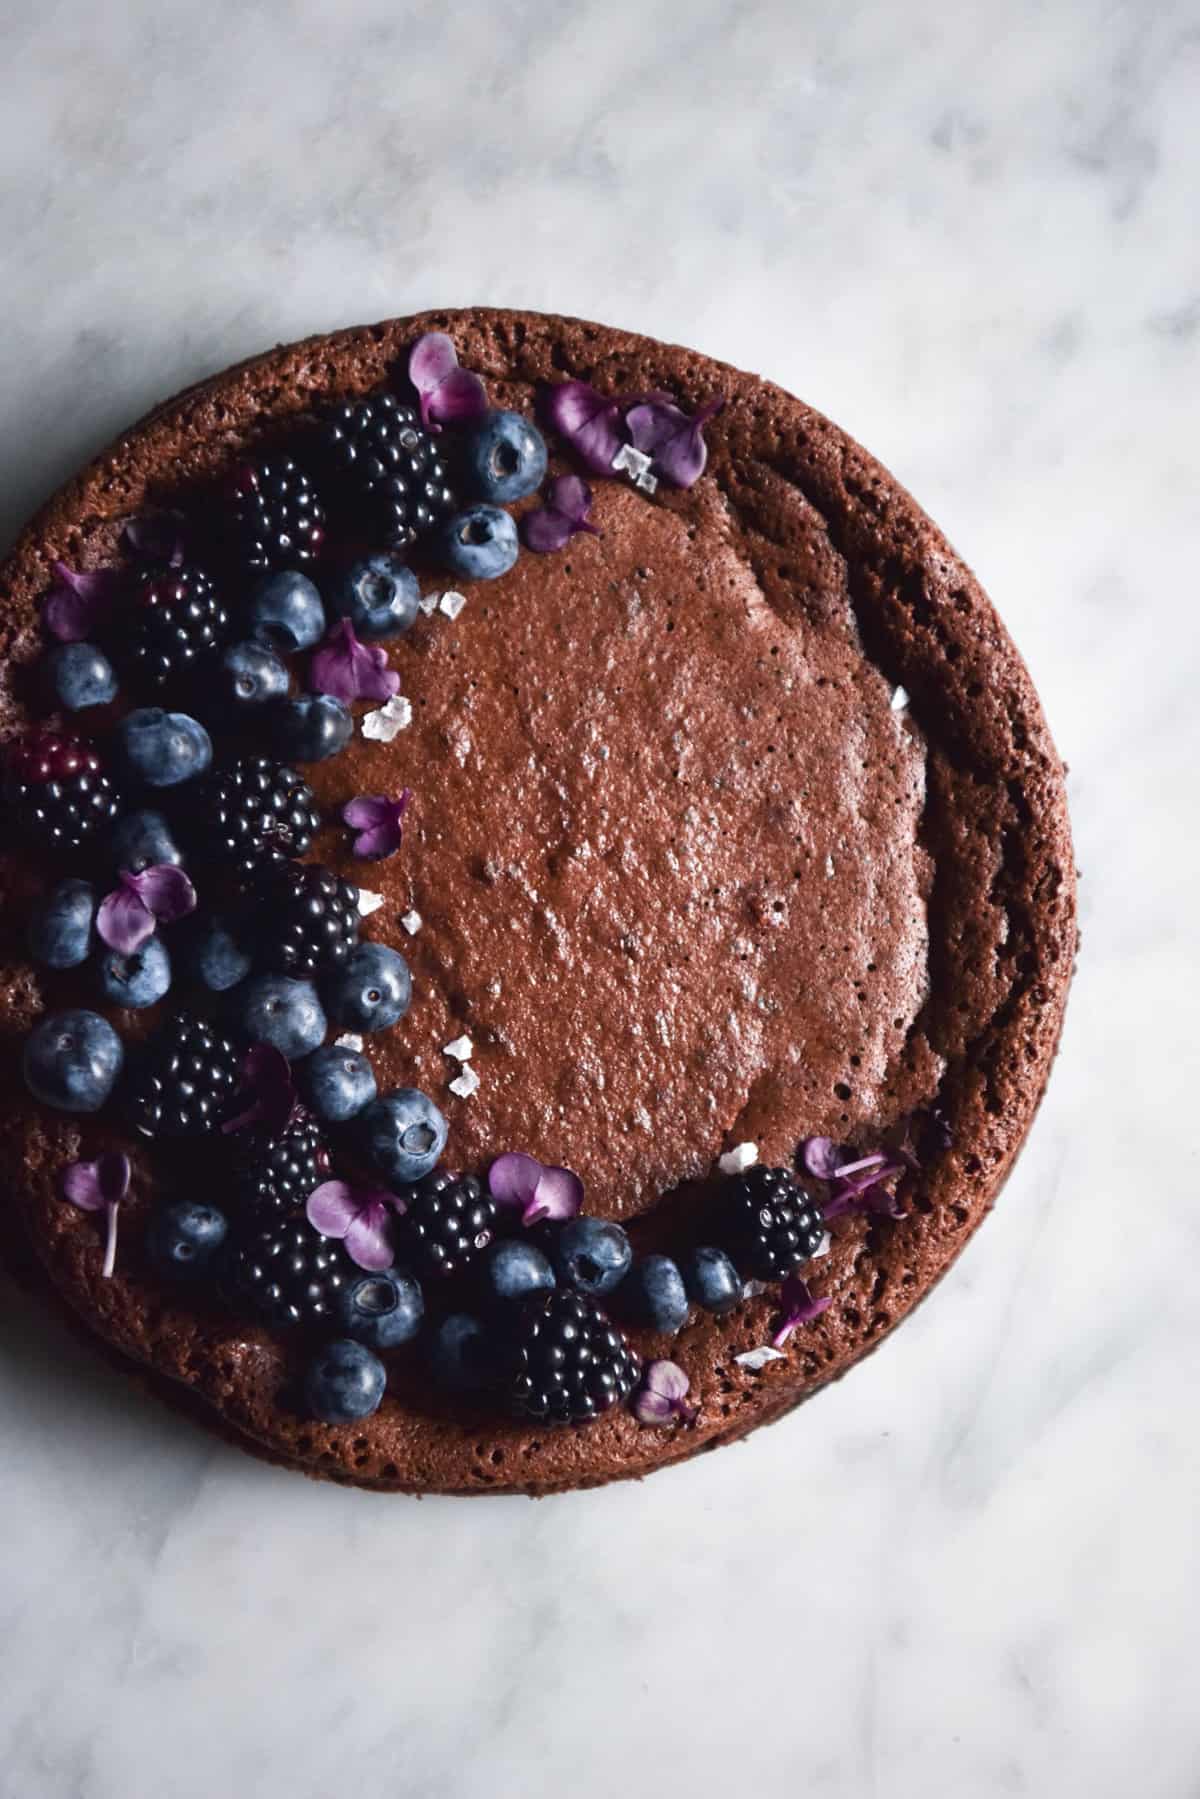 An aerial image of a flourless, nut free chocolate cake atop a white marble table. The cake has been decorated with blueberries, blackberries and purple flowers in a half moon shape on the left side of the cake.